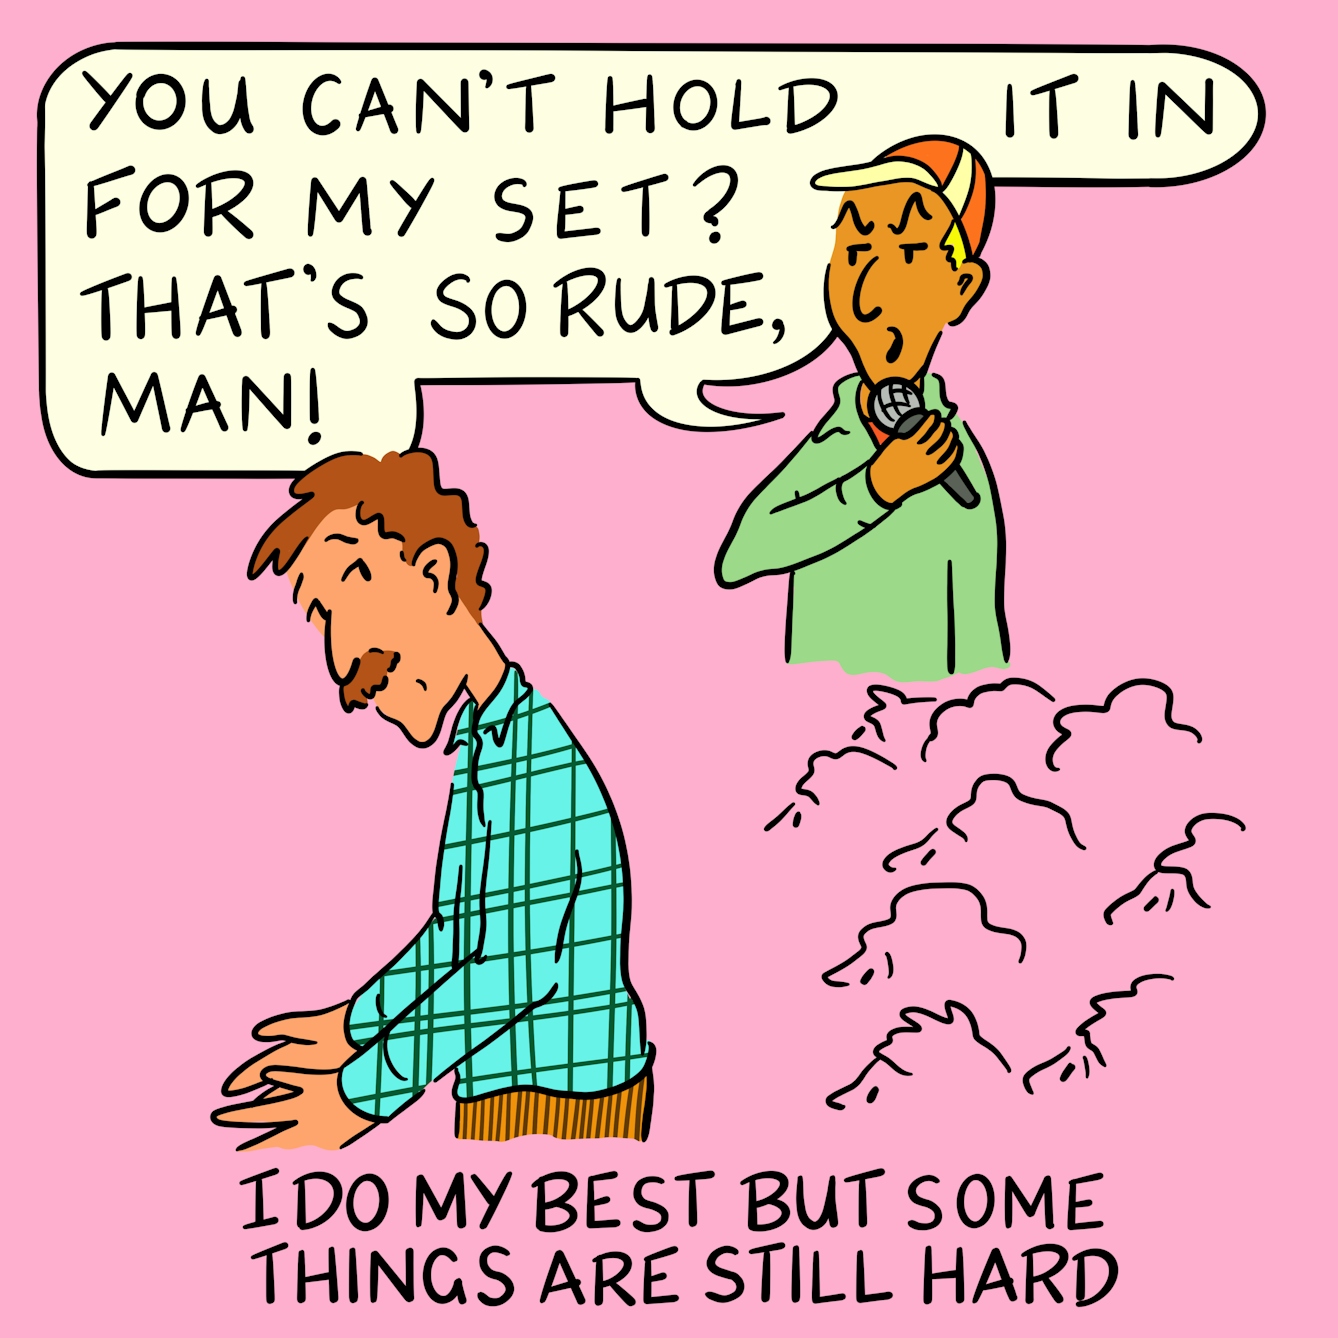 Panel 3 of a four-panel comic drawn digitally: a white man with a moustache, corduroy trousers and a plaid shirt, with the outline of seated heads around waist-height, resumes his attempt to leave the frame whilst looking back at a person wearing a baseball cap and holding a microphone, who says "You can't hold it in for my set? That's so rude, man!". The caption text reads "I do my best but some things are still hard"